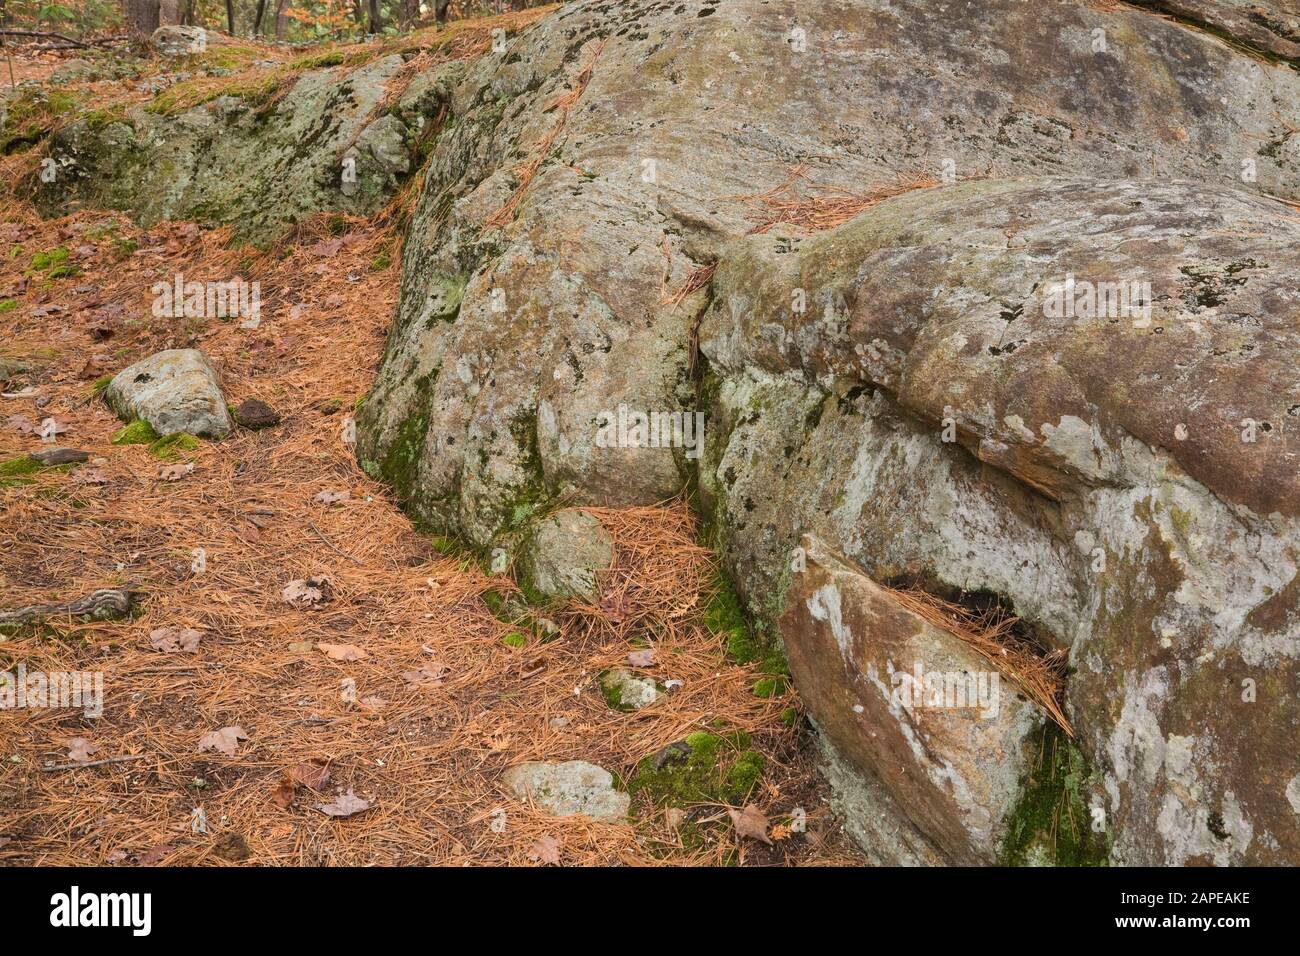 Fallen Pinus resinosa - Pine tree needles and exposed outcrops covered with green Bryophyta - Moss in forest in autumn Stock Photo